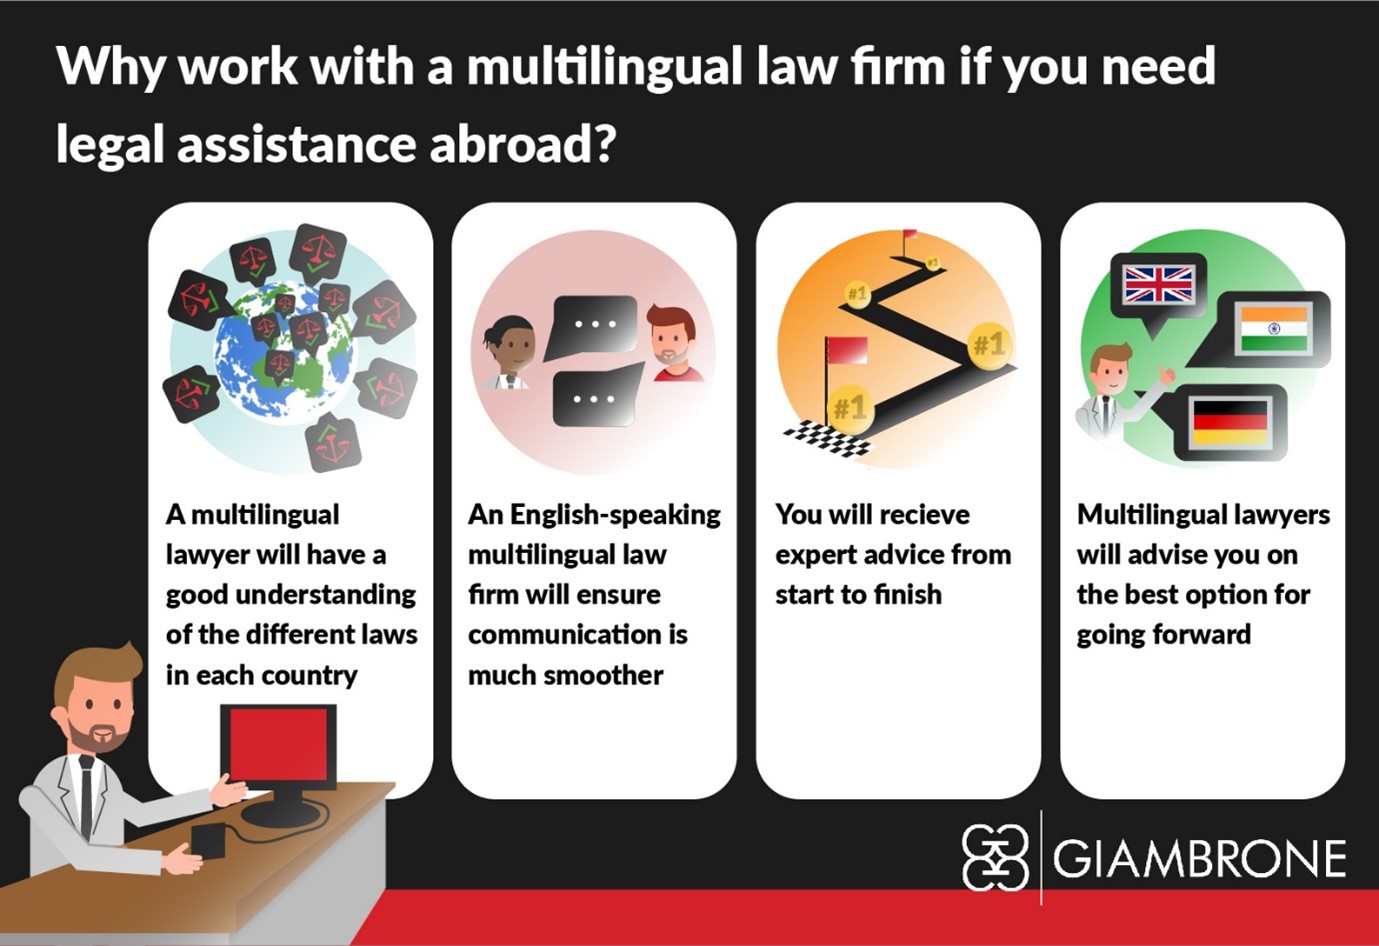 An infographic showing why you should work with a multilingual law firm if you need assistance abroad